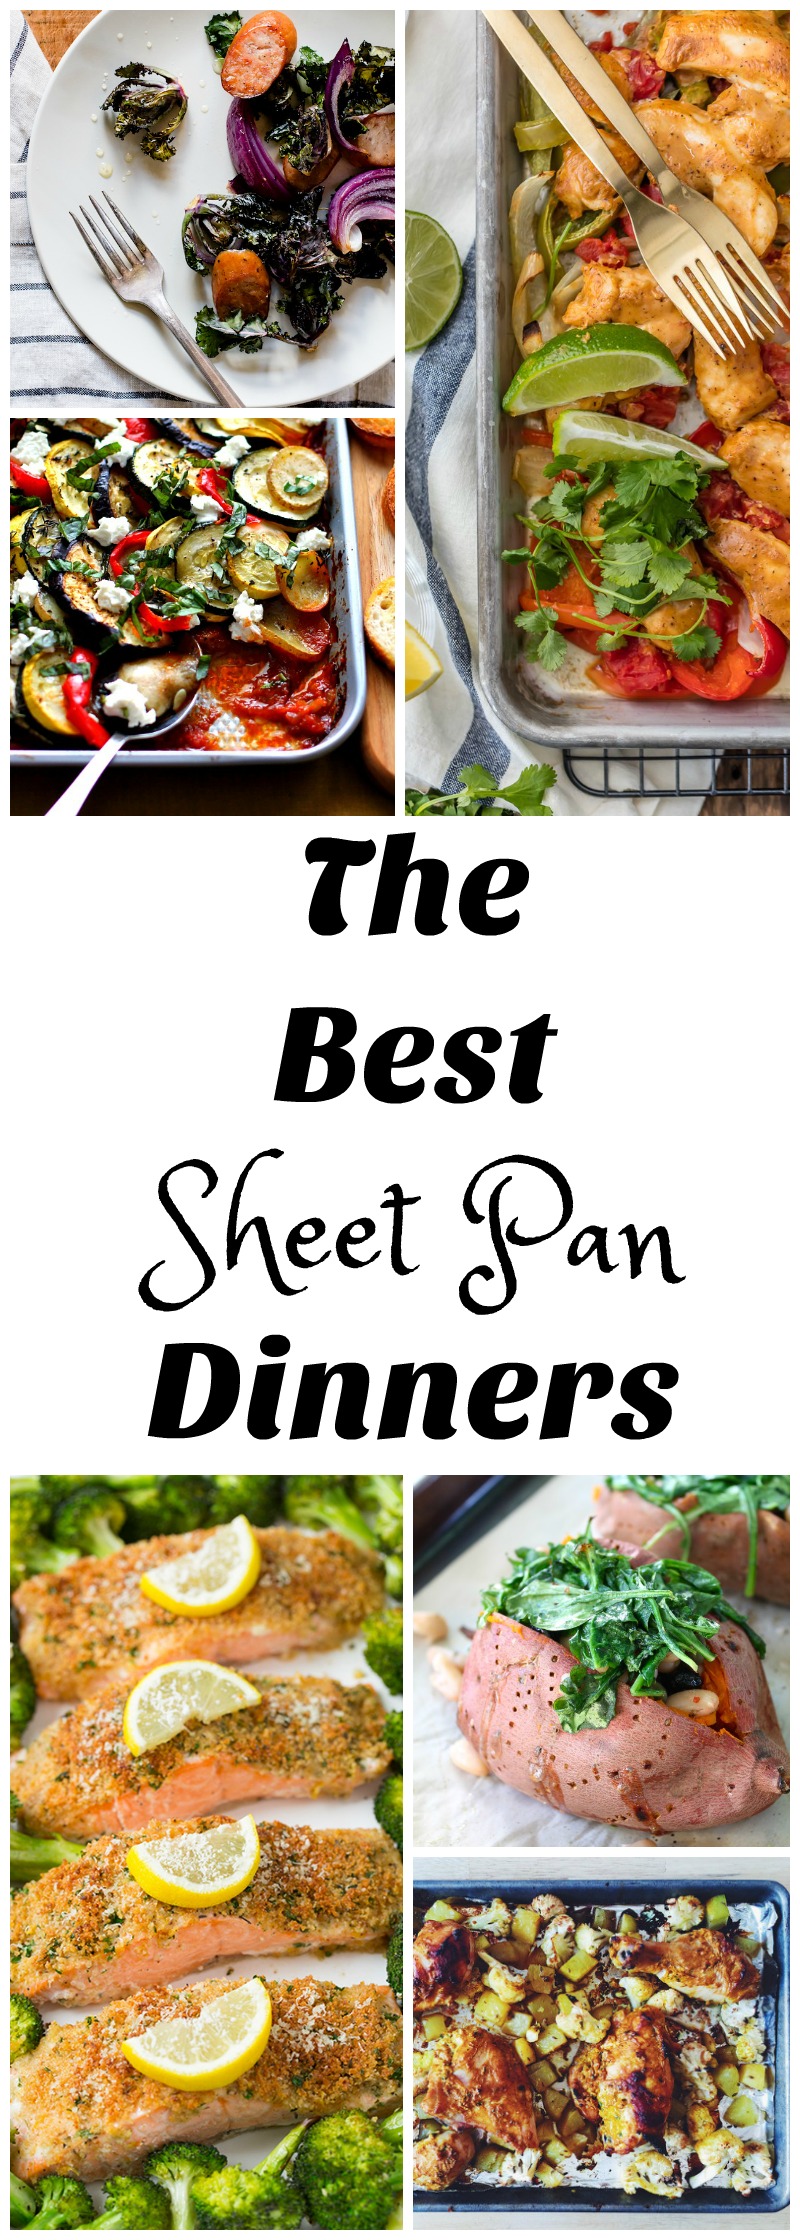 11 Amazingly Easy Sheet Pan Dinners